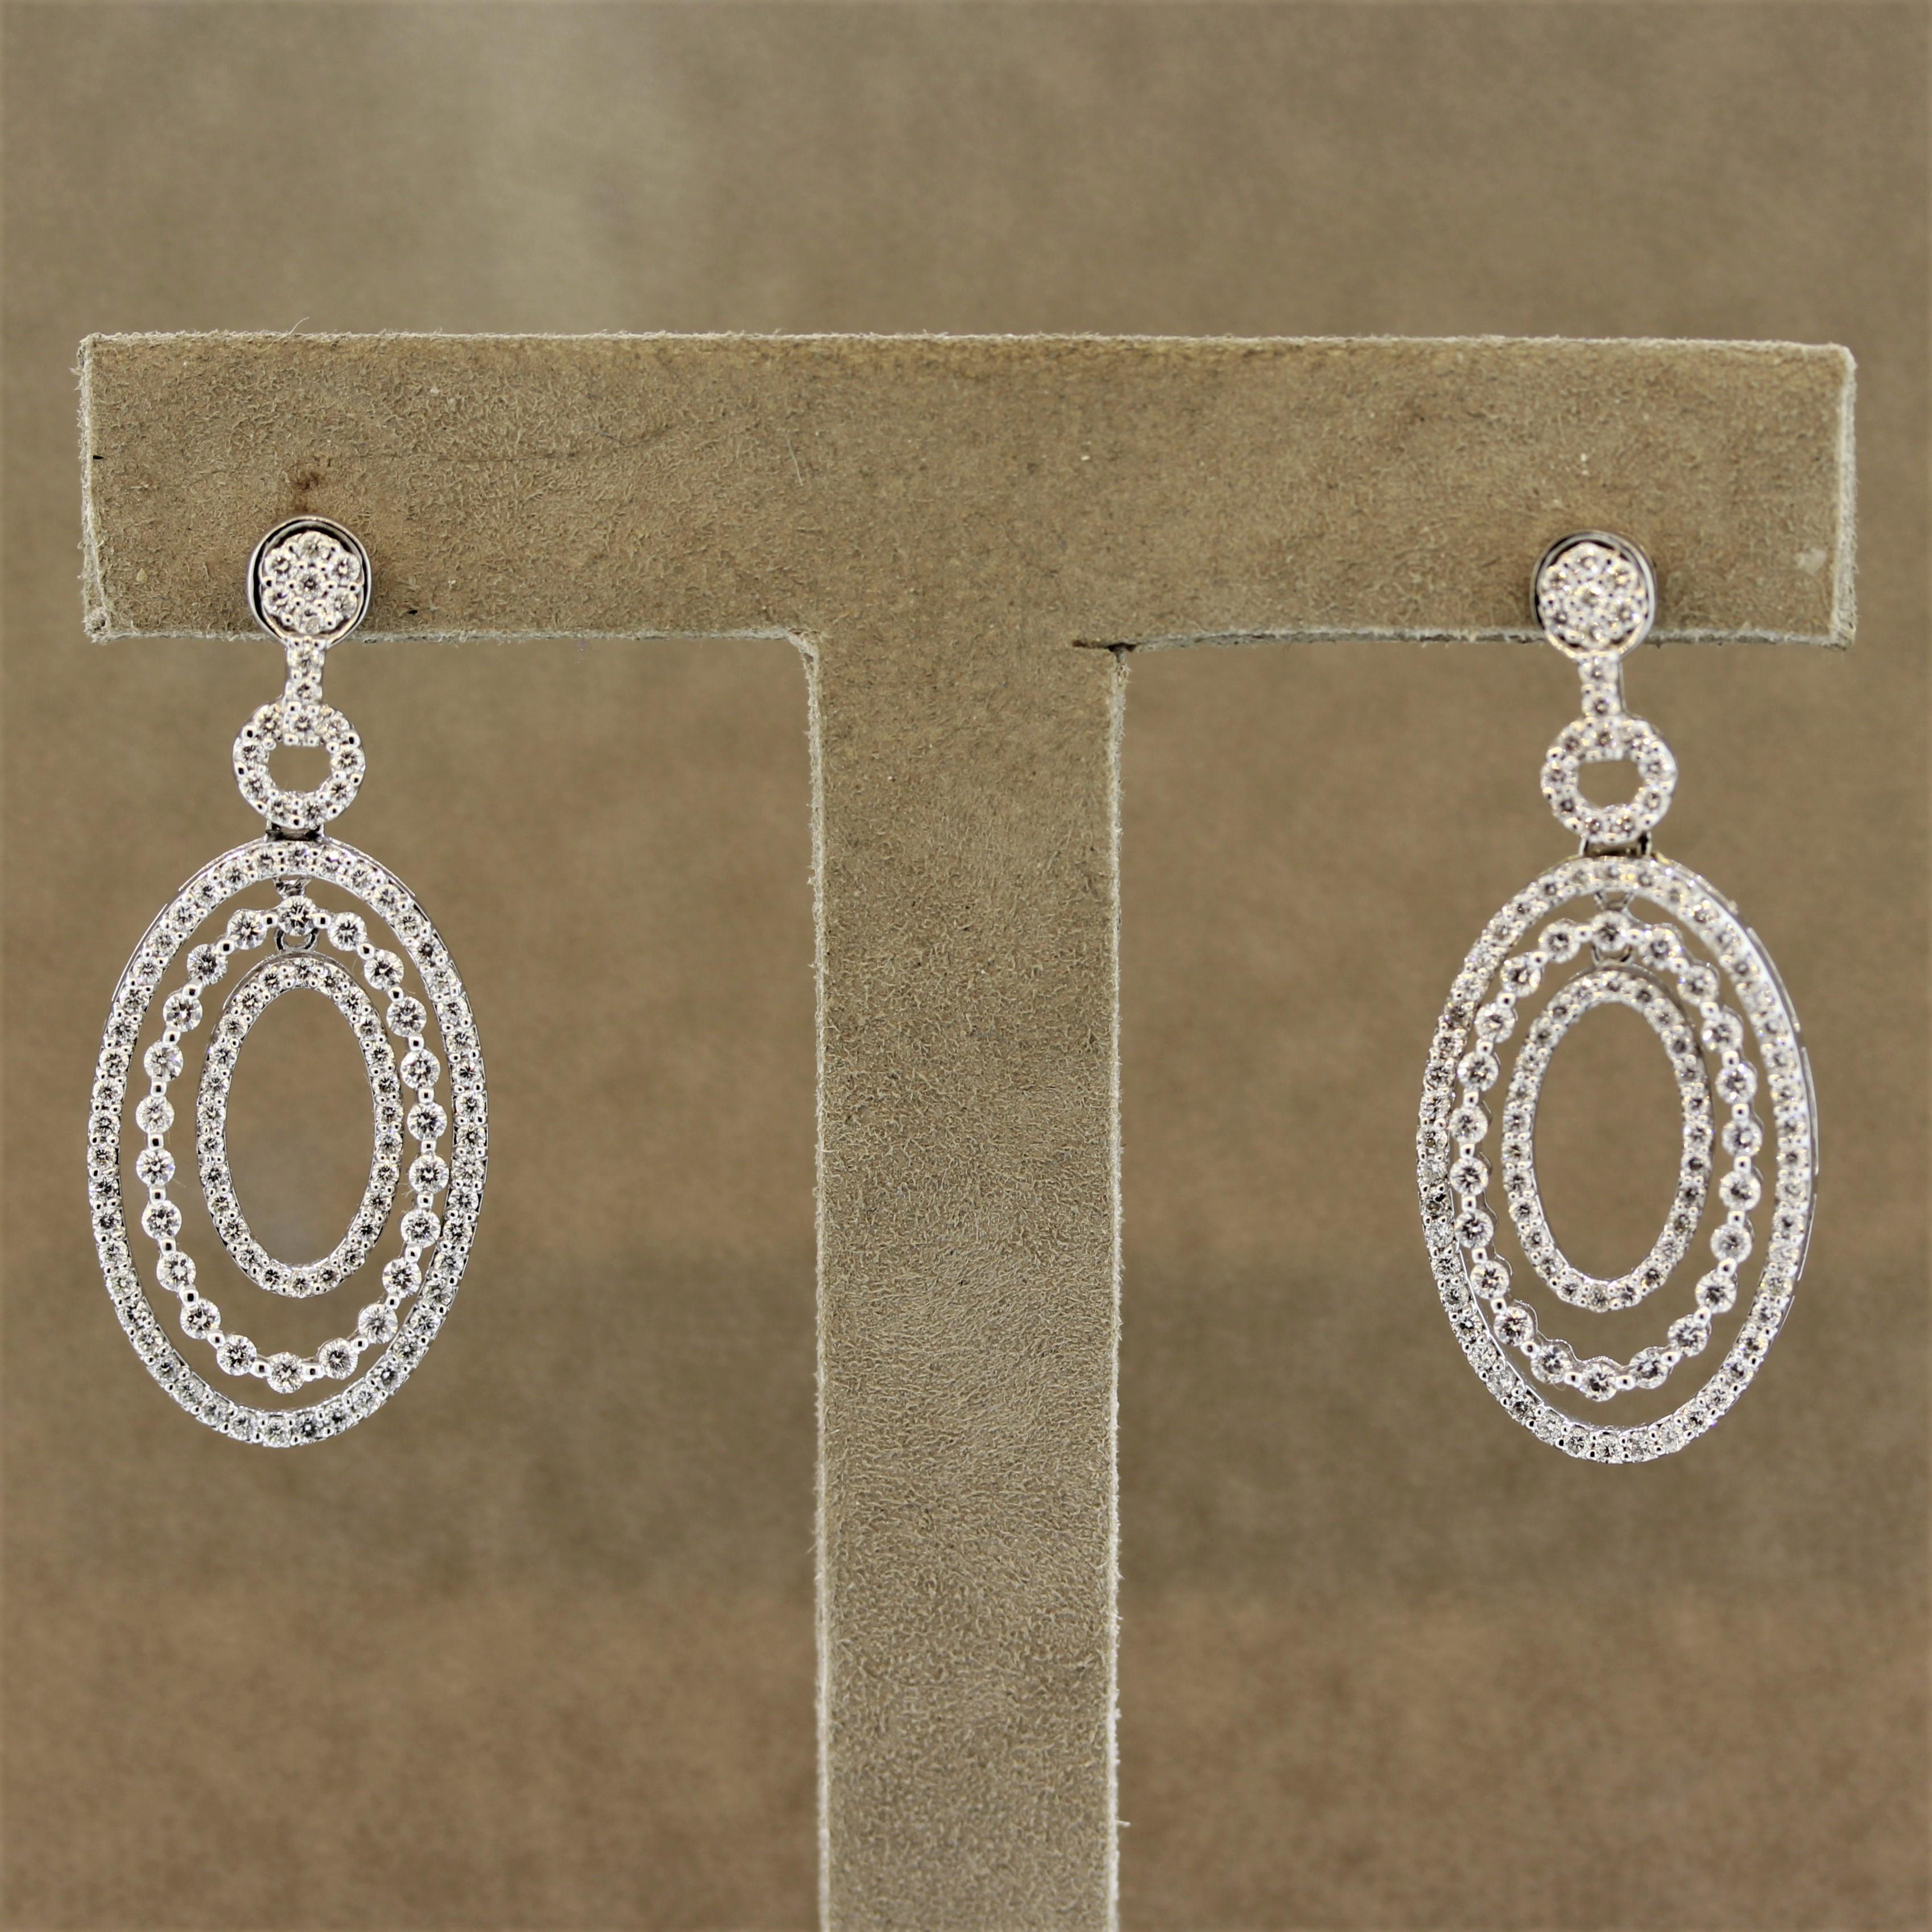 A stylish and fabulous pair of earrings featuring 2.12 carats of round brilliant cut diamonds. They are set along the entirety of the earrings as well as the 3 hoops which are all independent of each other with their own drop and movement. Made in